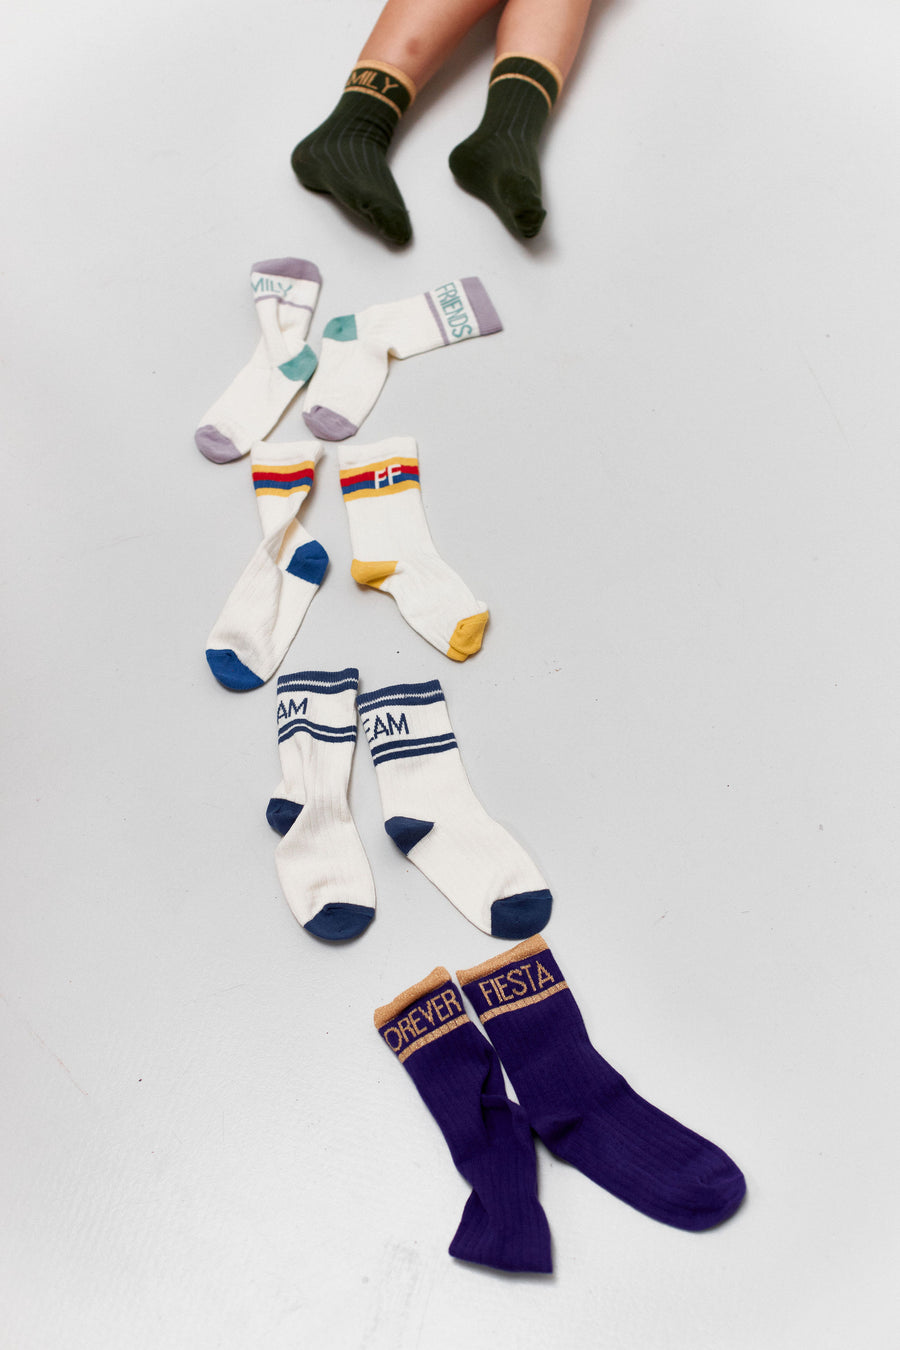 Chaussettes Georgette ##2393A Violet/or